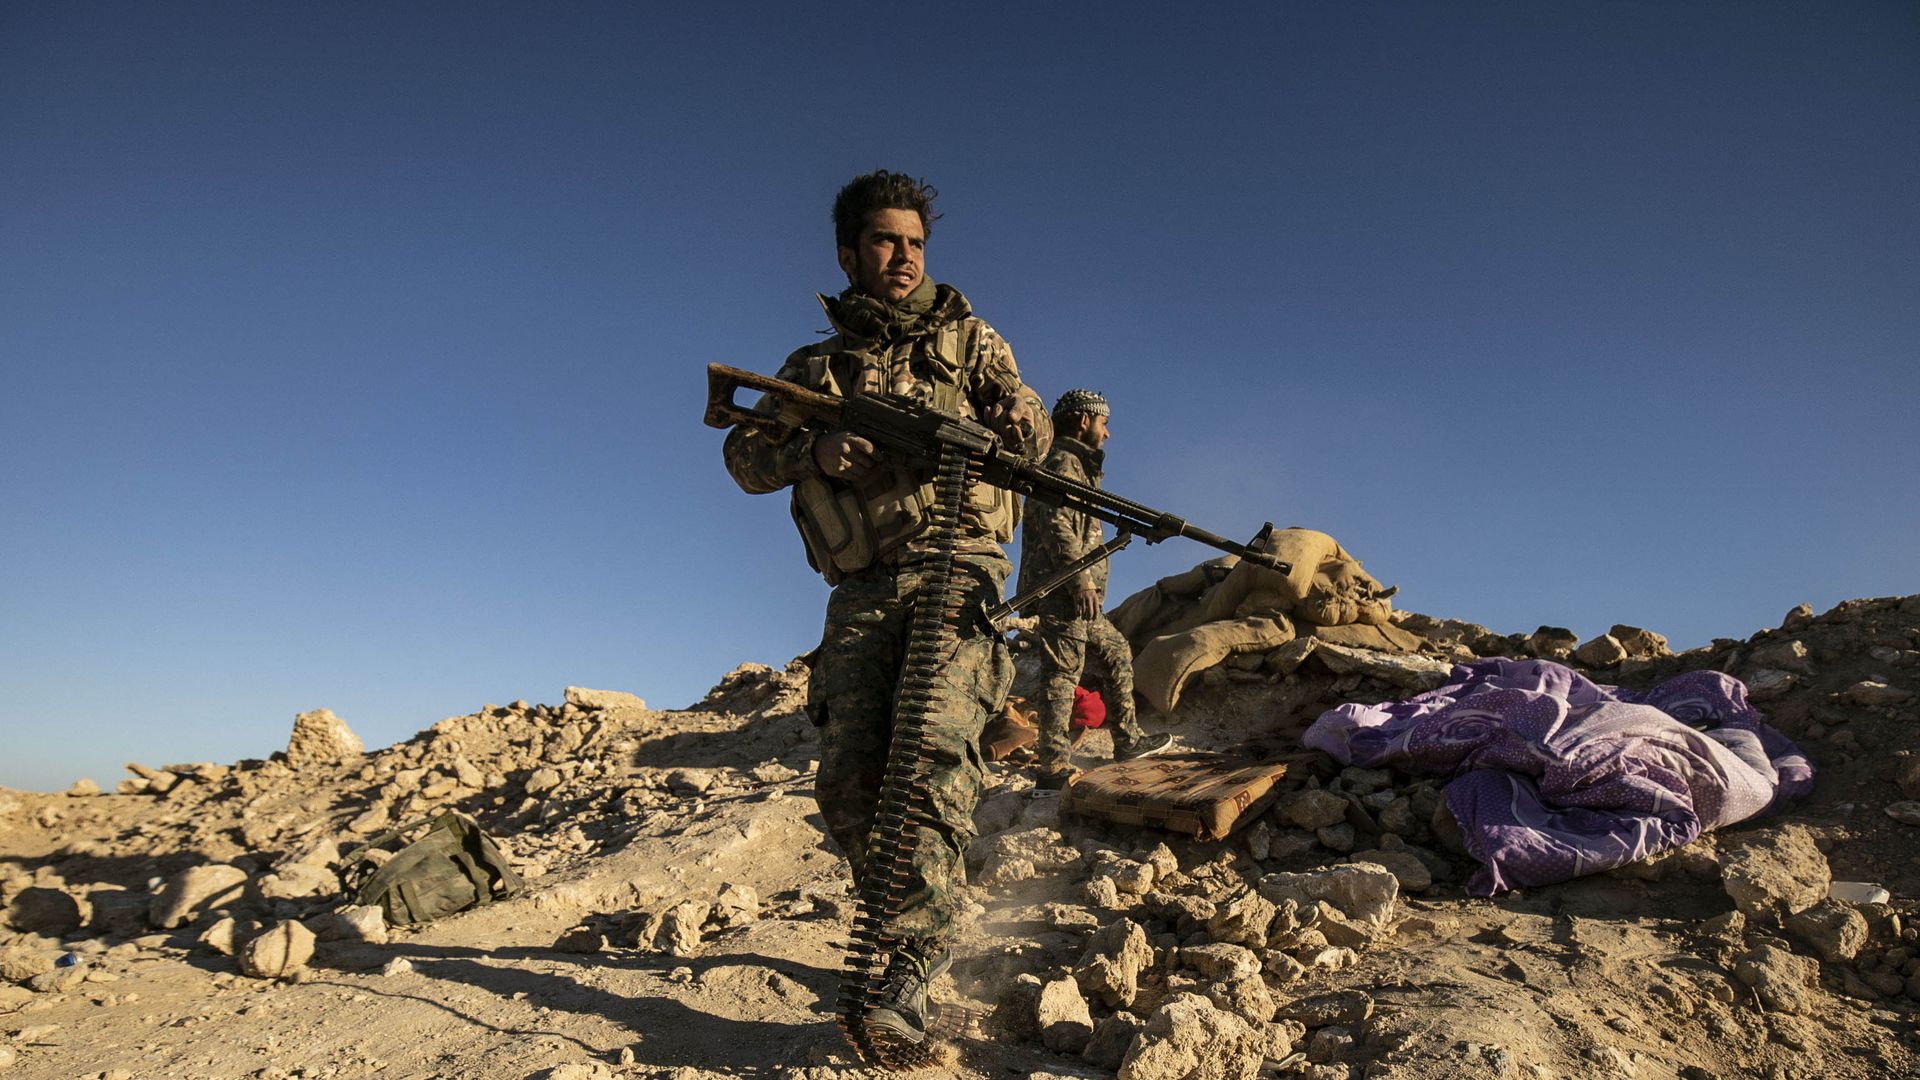 A Syrian fighter stands alone on a dirt hill, carrying an assault weapon.